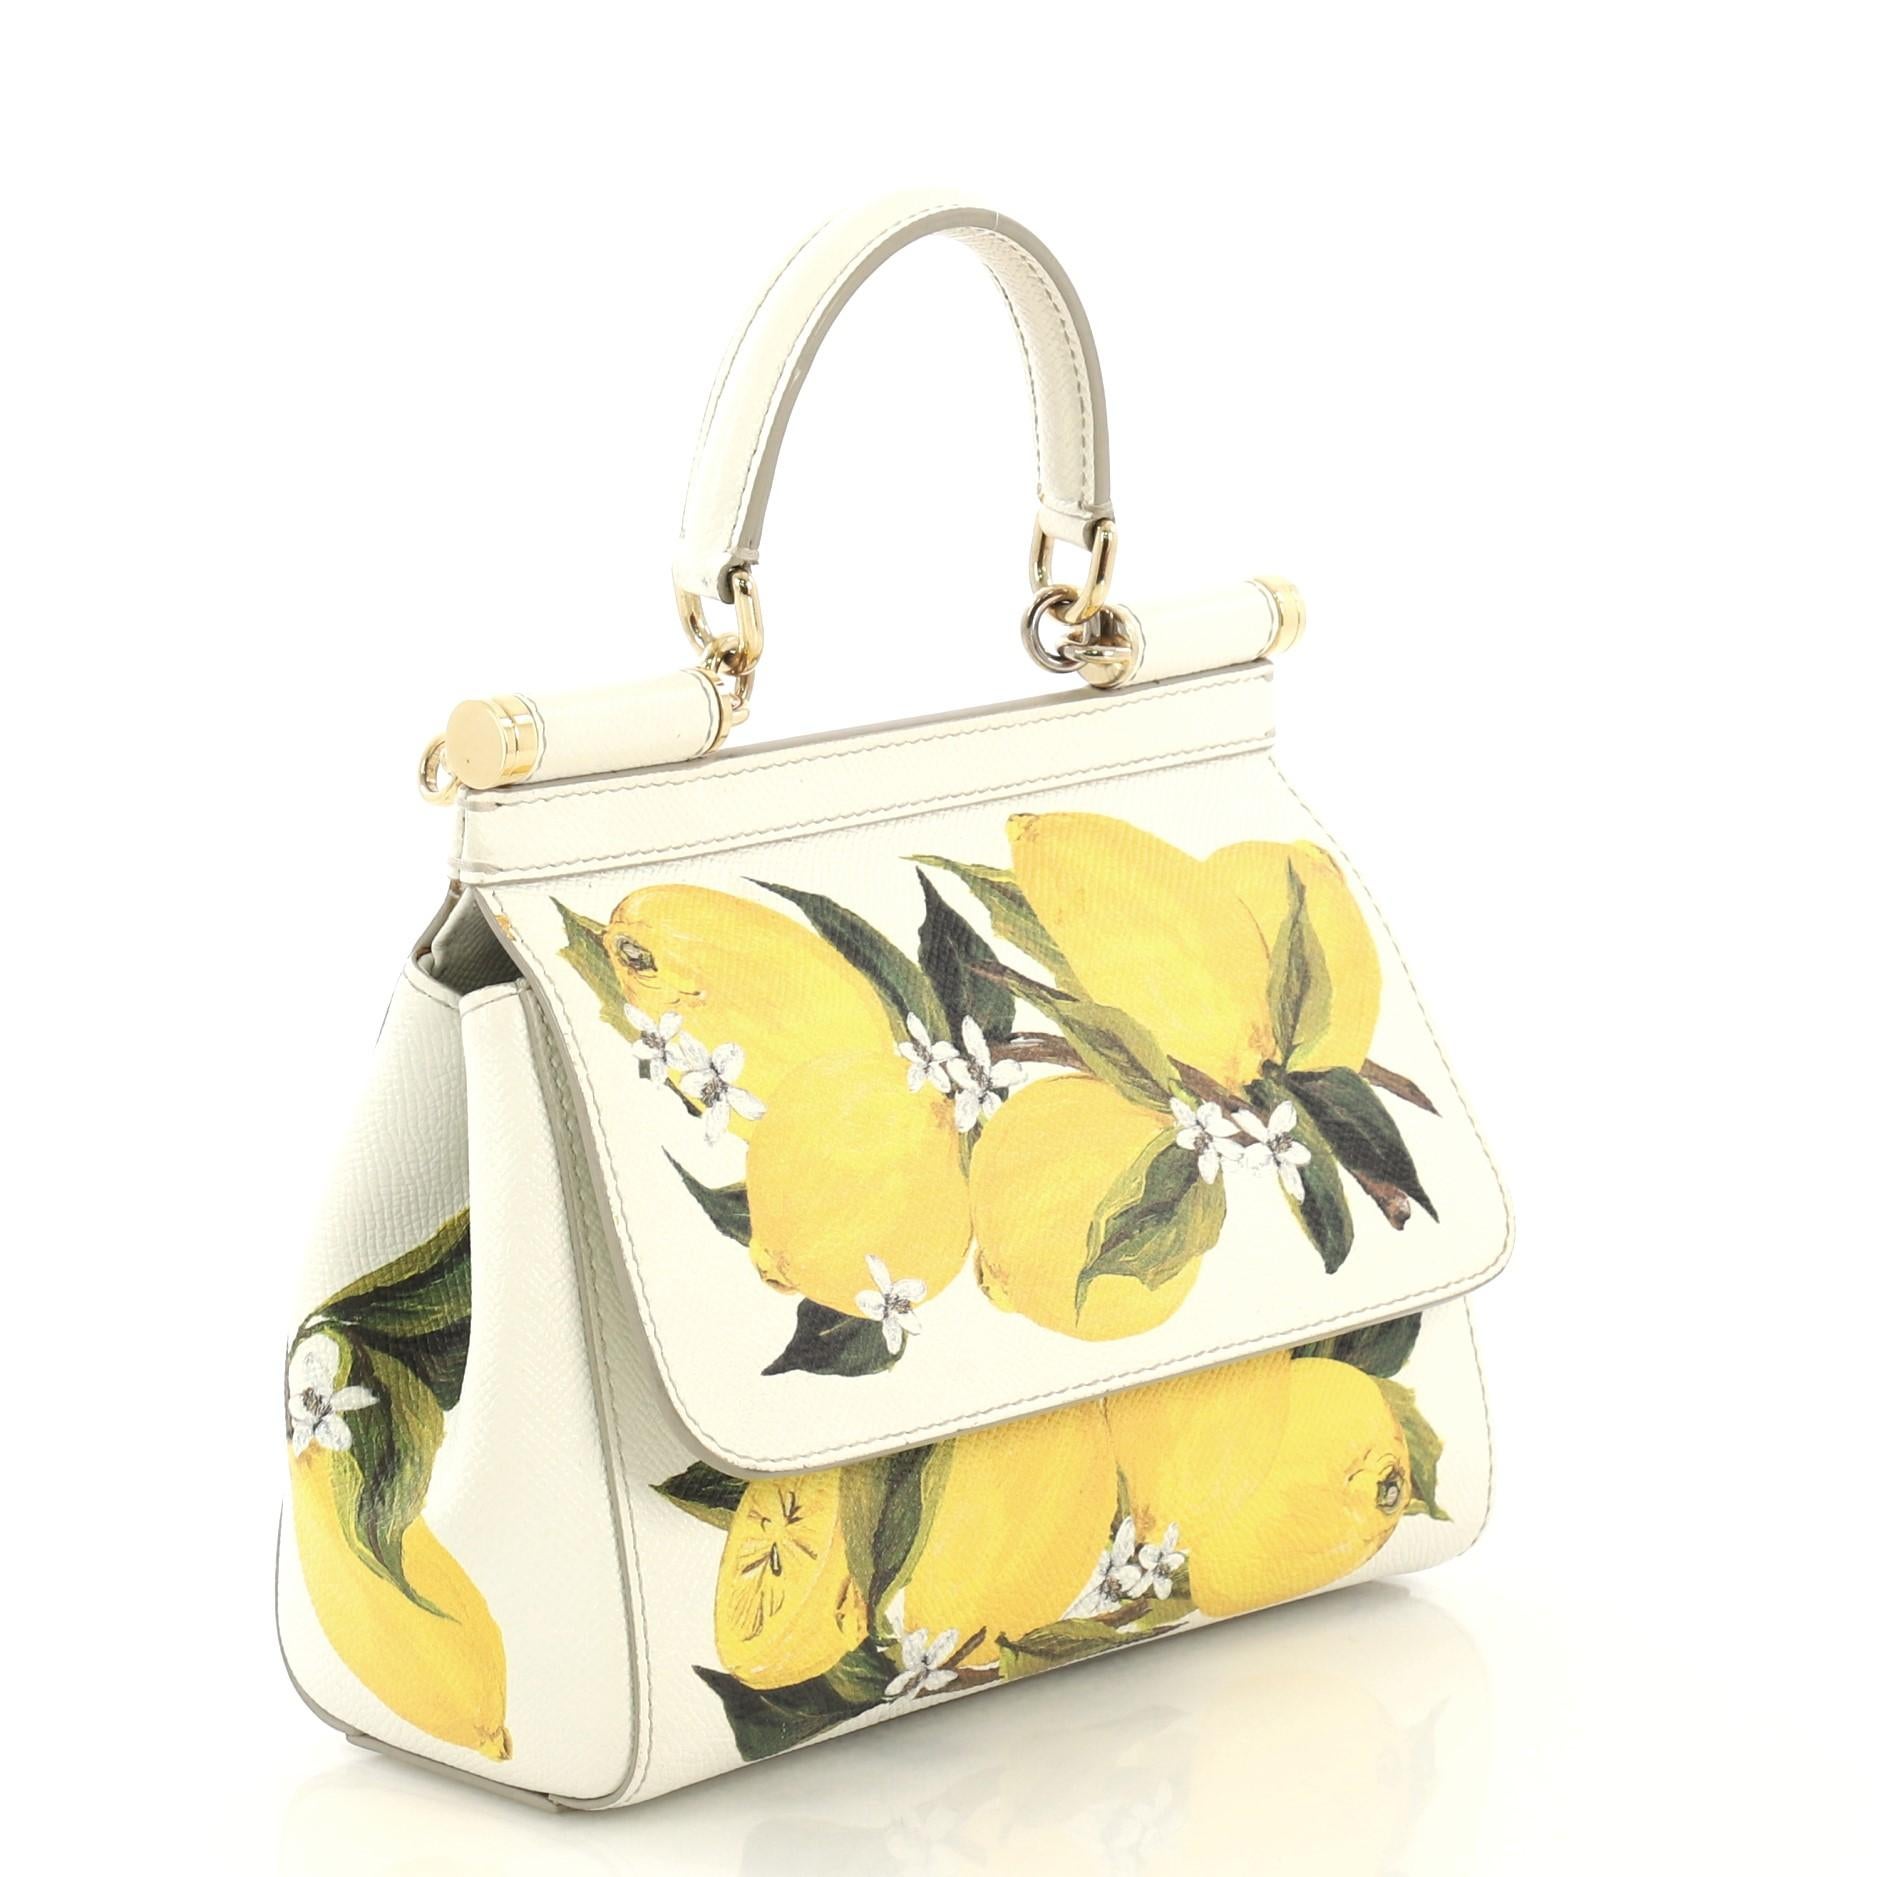 This Dolce & Gabbana Miss Sicily Bag Printed Leather Small, crafted in white printed leather, features a single looped leather handle, frontal flap and gold-tone hardware. Its magnetic snap closure opens to a black fabric interior with slip pockets.